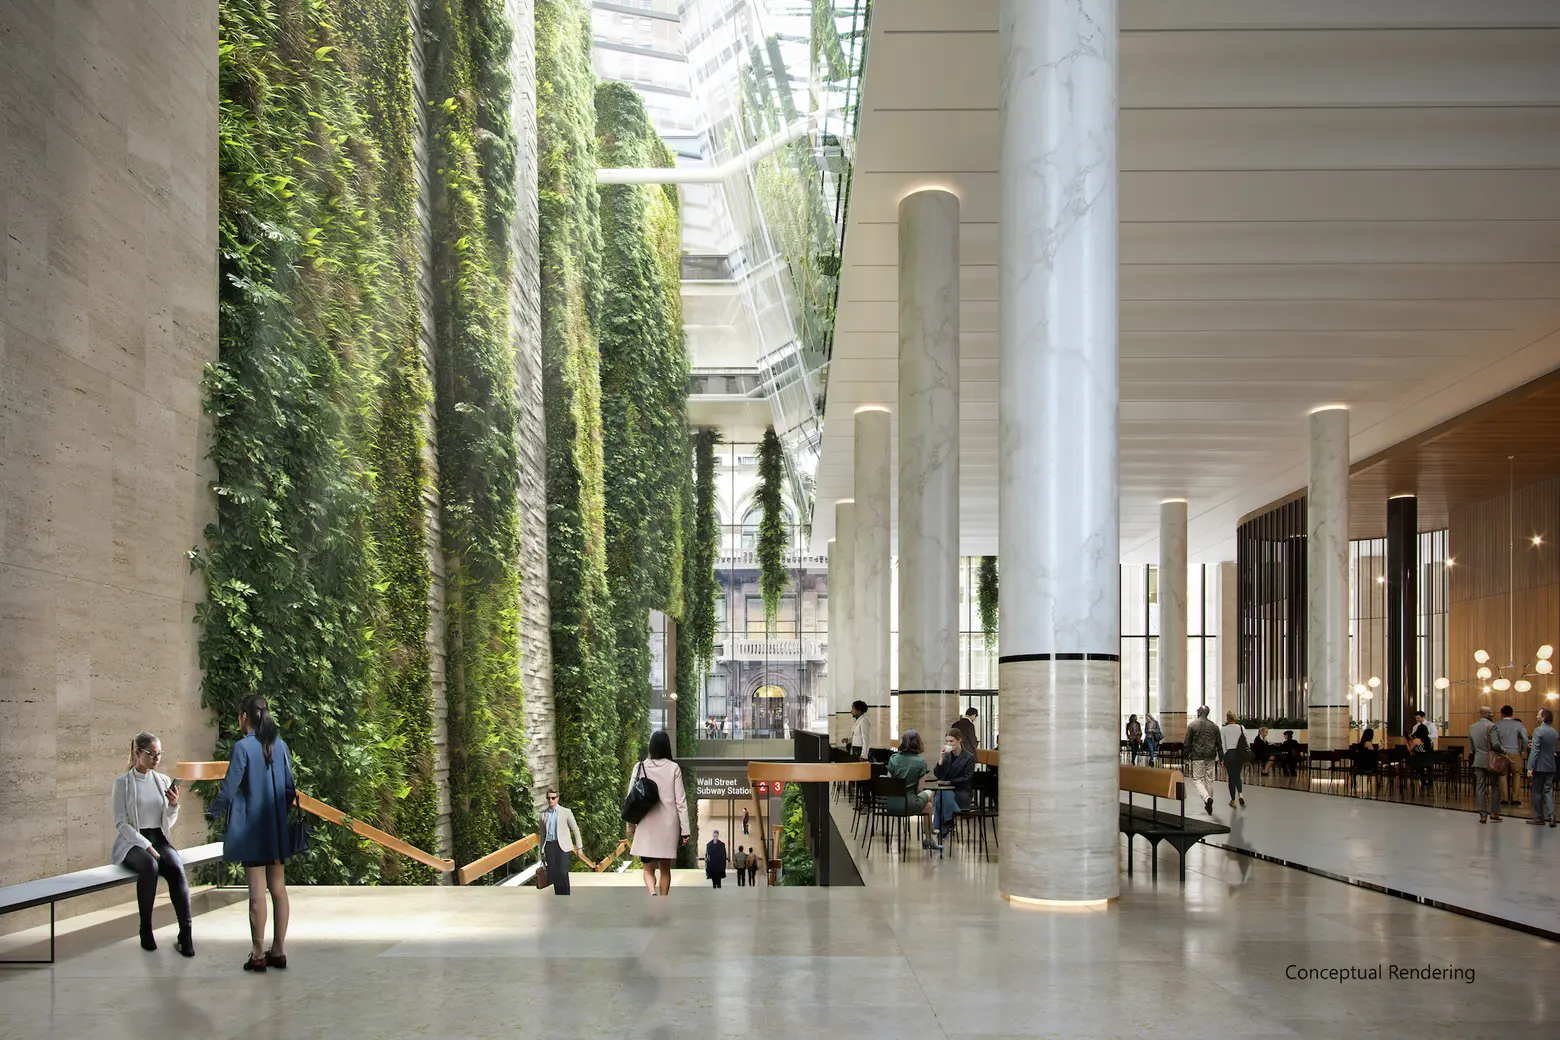 60 Wall Street revamp swaps out postmodern atrium for a skylight and massive 100-foot green wall